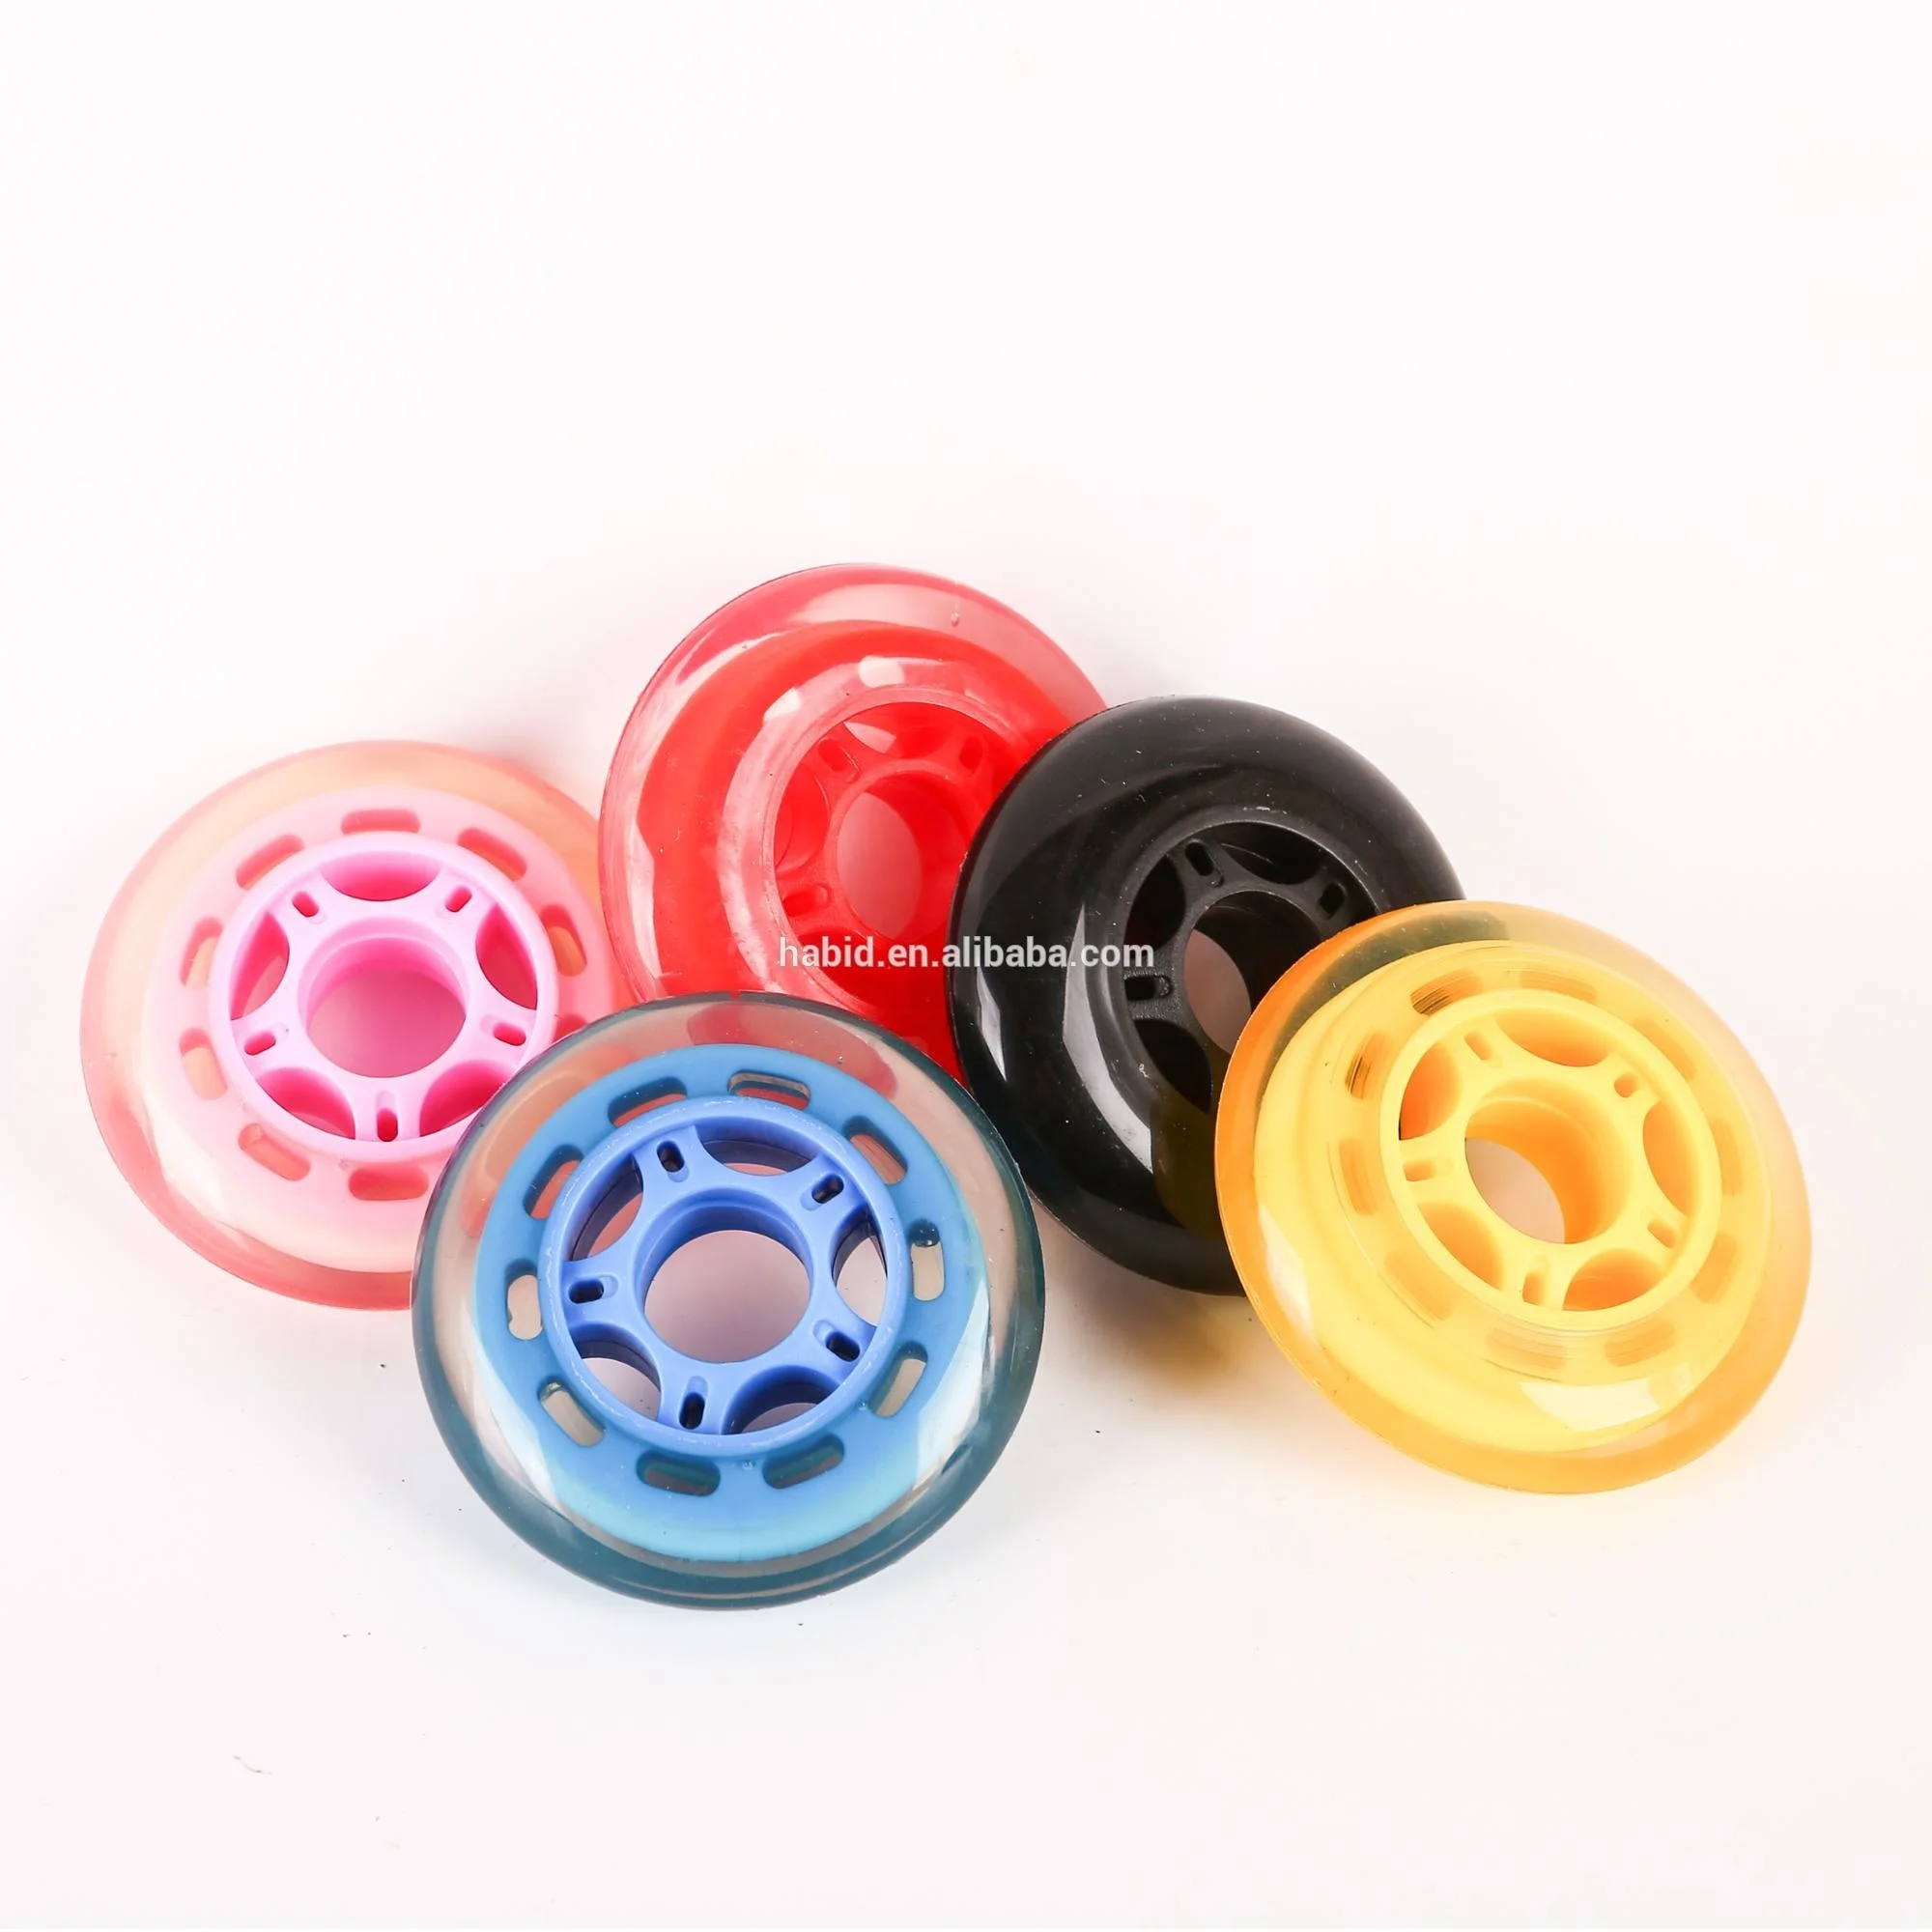 

black kids roller skate wheel 80*24 mm factory price PU stake wheels for speed skate shoes, Red blue, green ,yellow,white, black,as per your demand